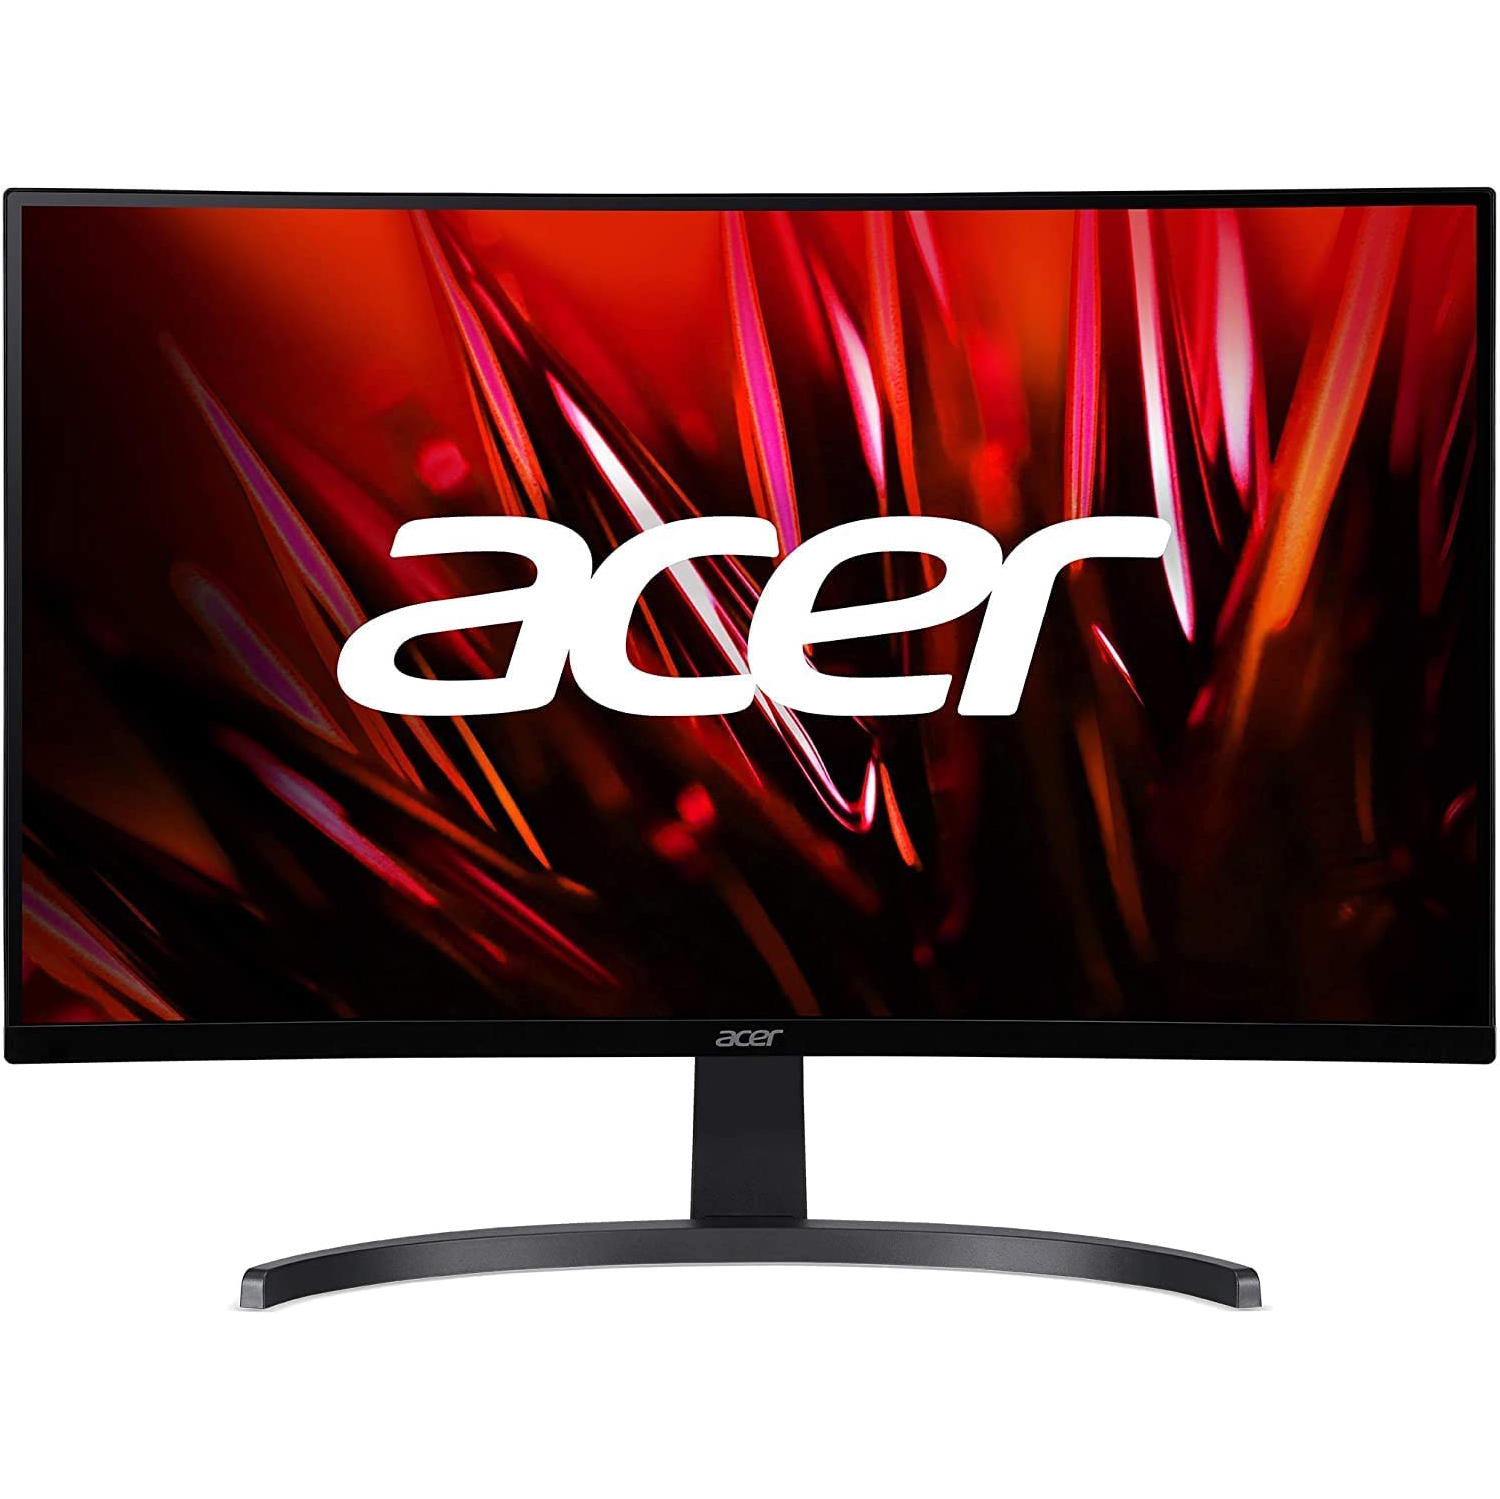 Acer 27" Curved WQHD 2560 x 1440 1ms VRB 100Hz AMD FreeSync Gaming Monitor - Refurbished (Excellent) w/ 2 Years Warranty